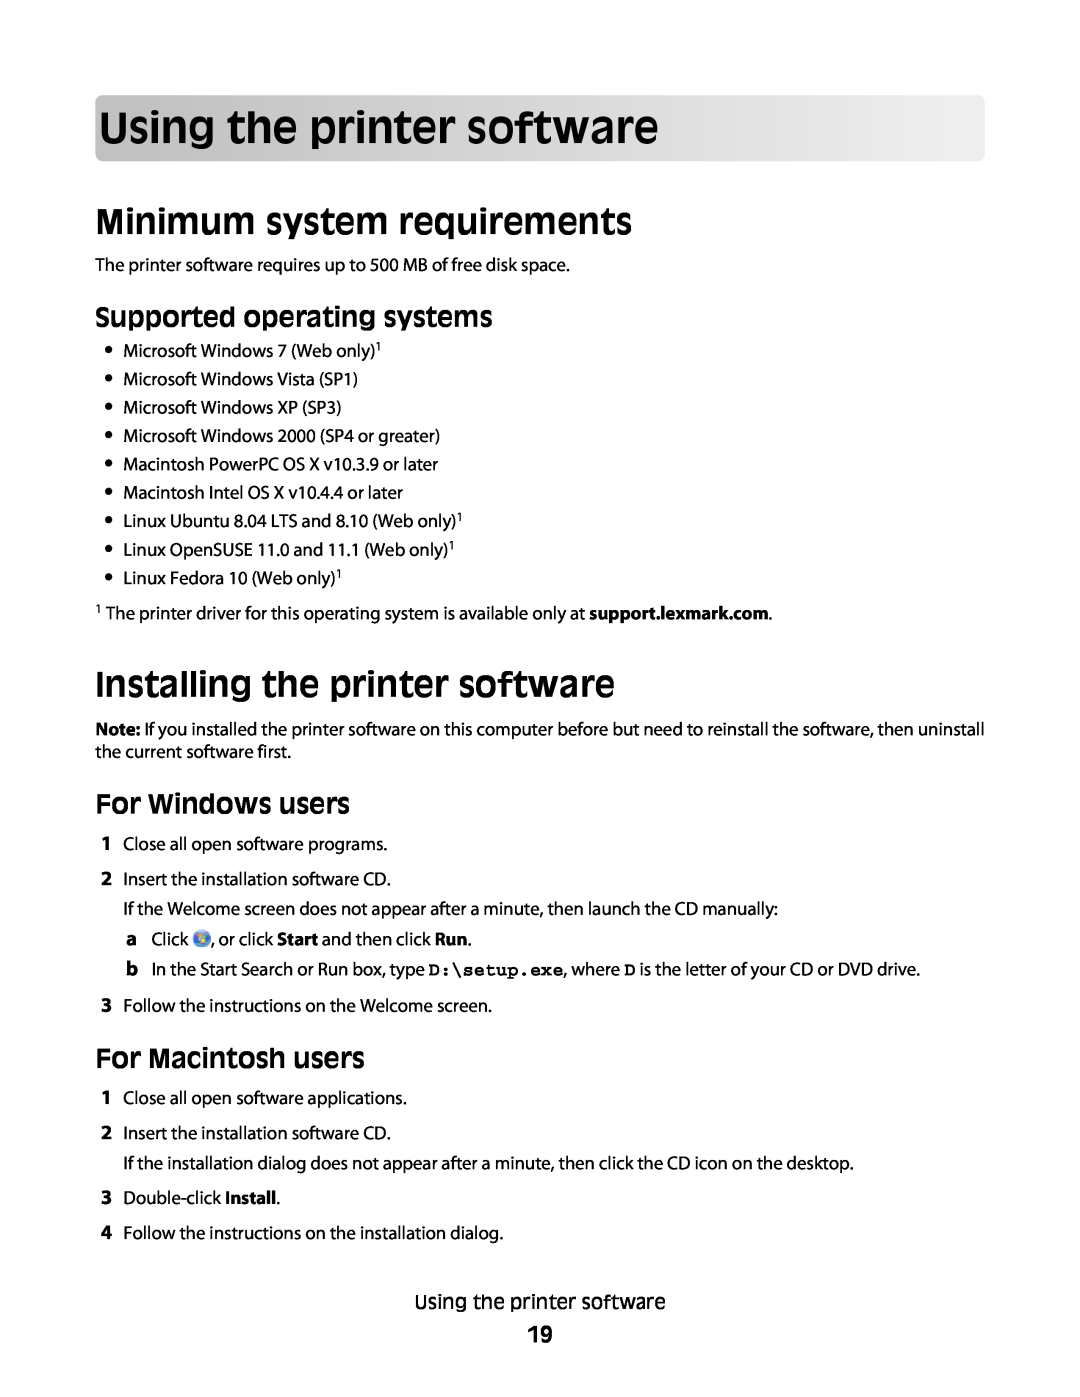 Lexmark Pro800 Usingthe printersoftware, Minimum system requirements, Installing the printer software, For Windows users 